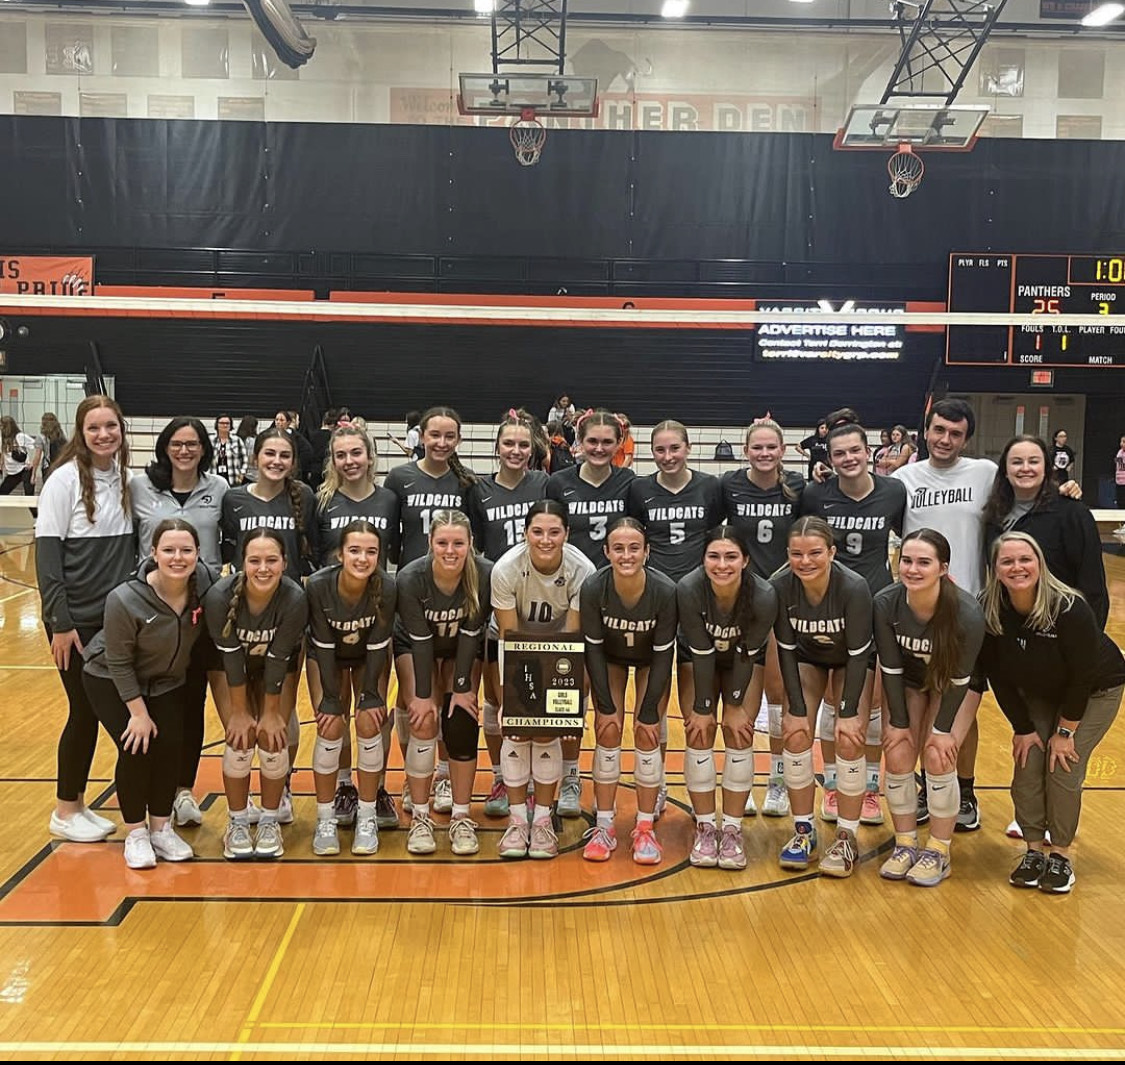 The Normal West volleyball team won their 3rd straight regional championship last night. They will play in Pekin on Tuesday, October 31 for the Sectional semifinal game.